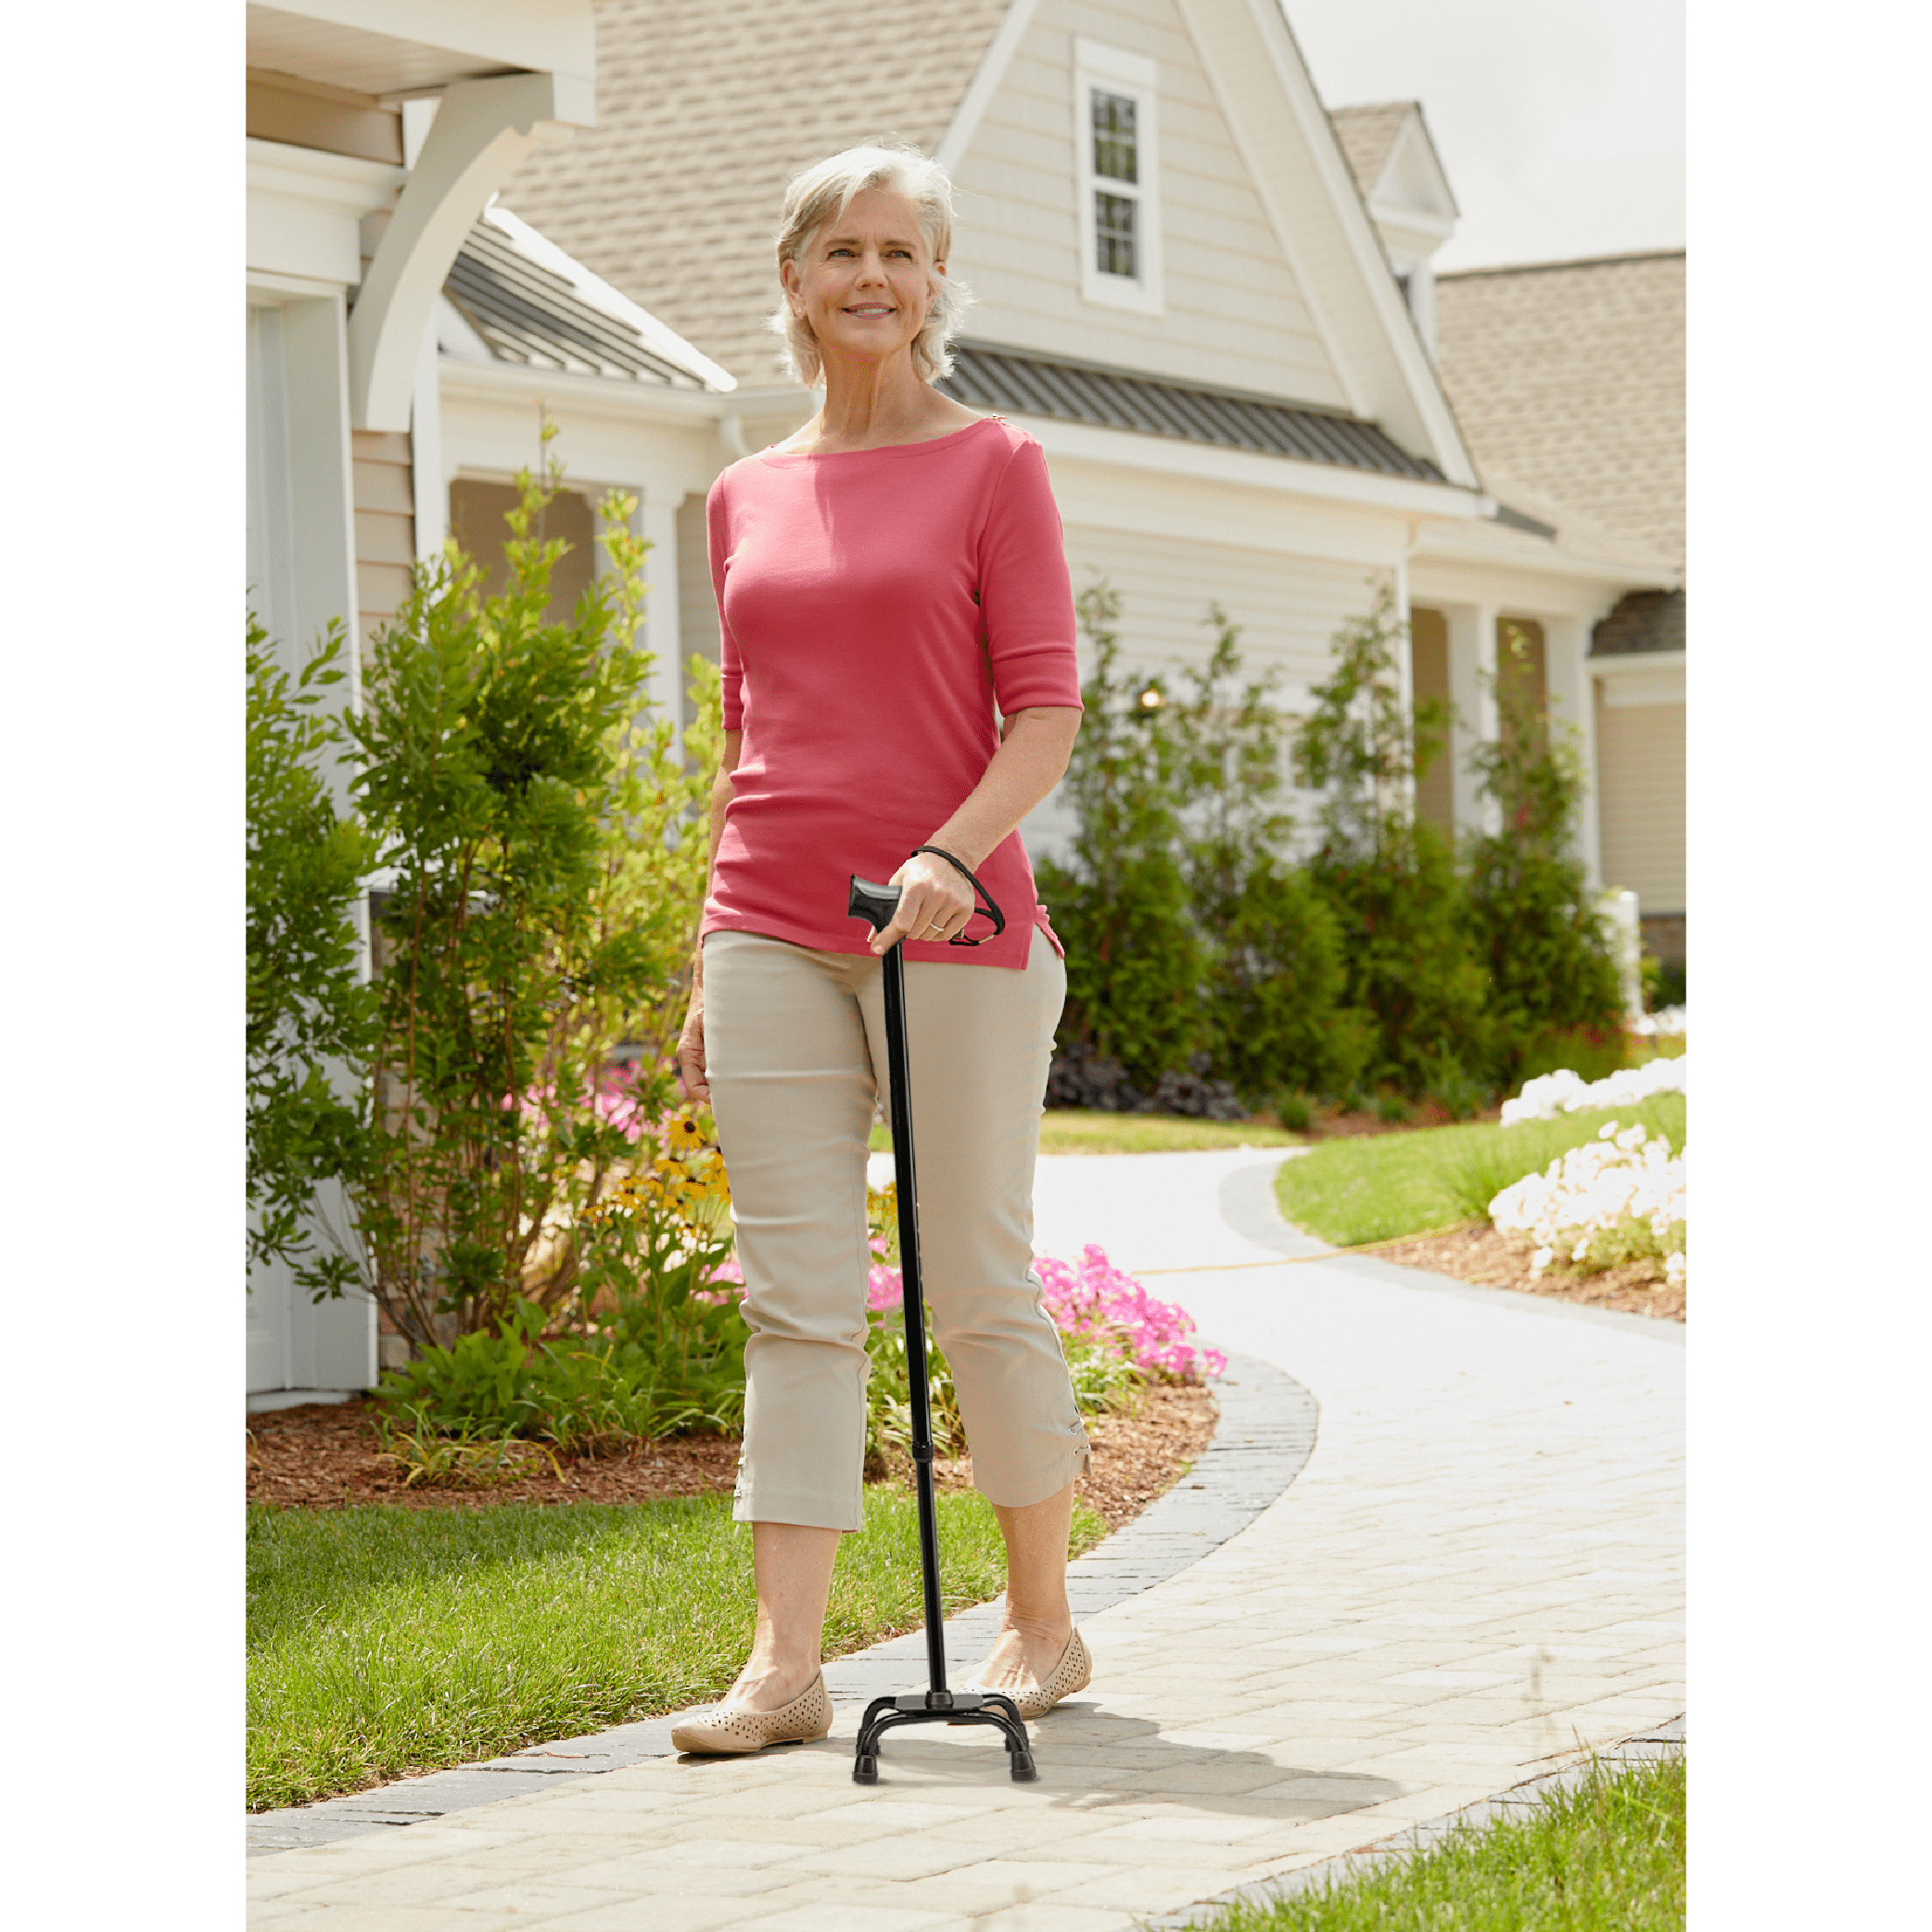 Carex Small Base Quad Cane with Soft Grip Derby Handle - Carex Health Brands